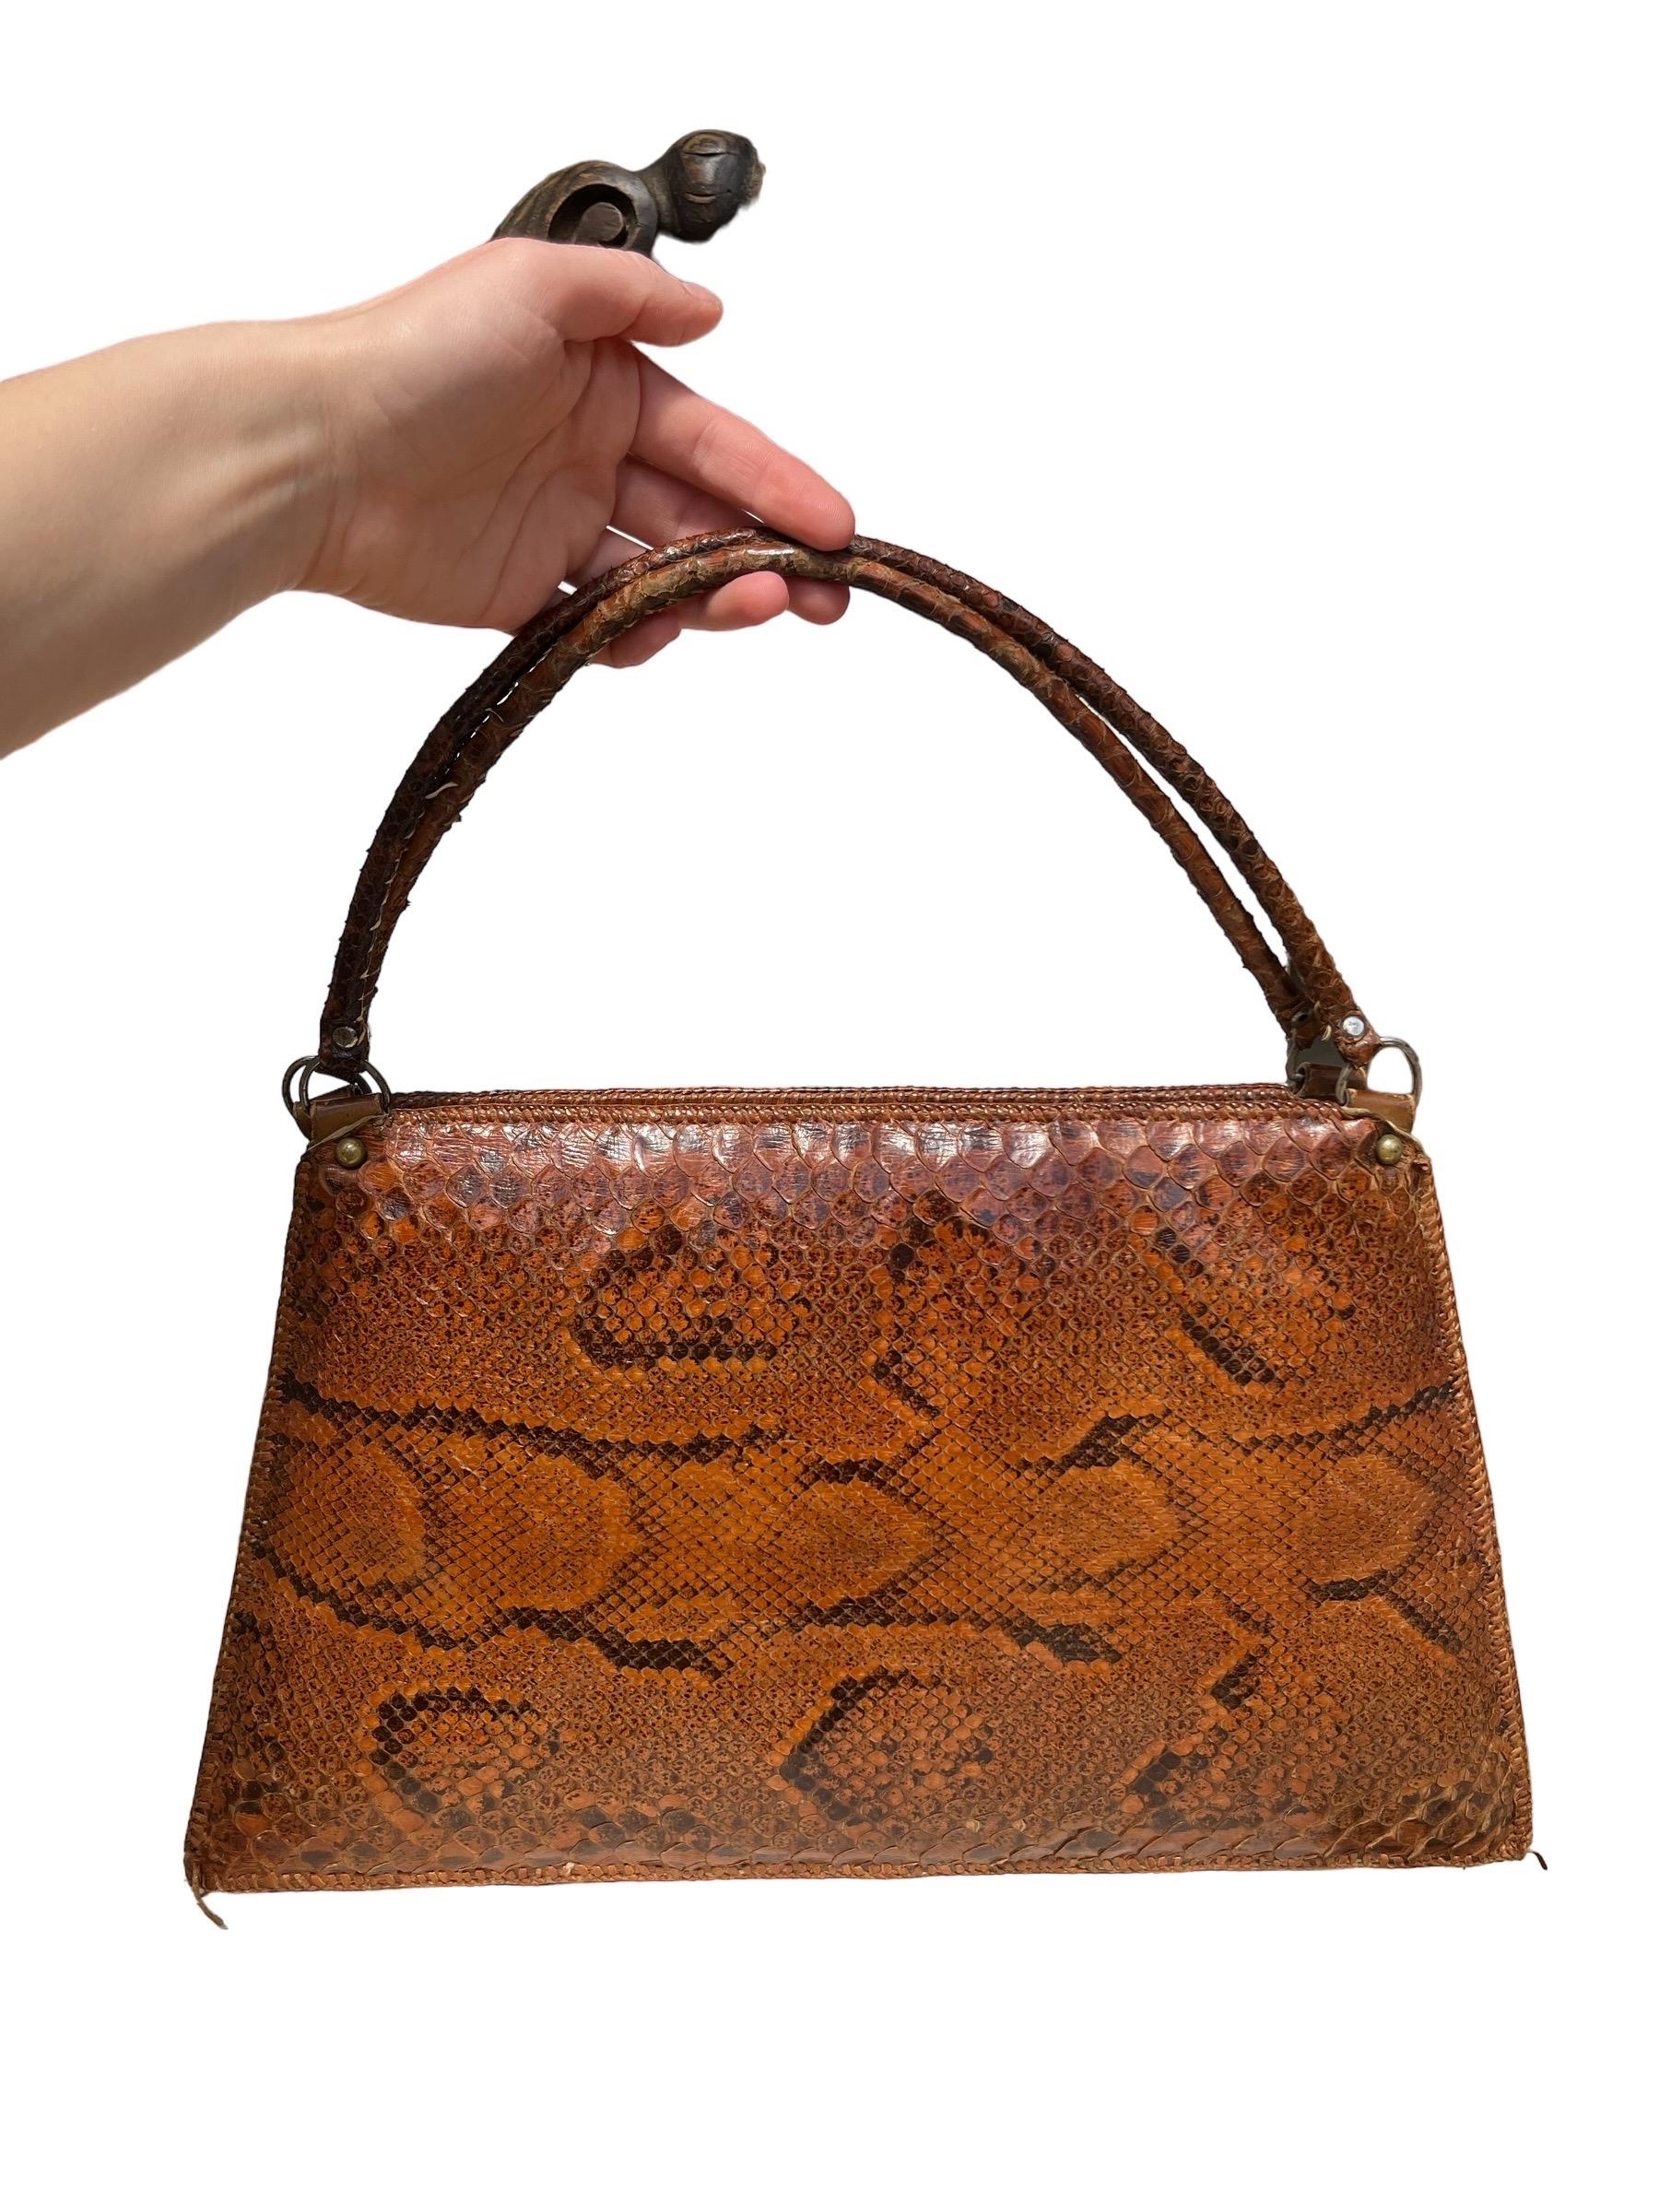 Large Vintage 1960s Genuine Snakeskin Purse 

Genuine vintage snakeskin top-handle handbag with leather interior. Made & originally purchased in Sudan circa 1960s. Zipper works great, can hold quite a lot for with its size. Excellent condition for